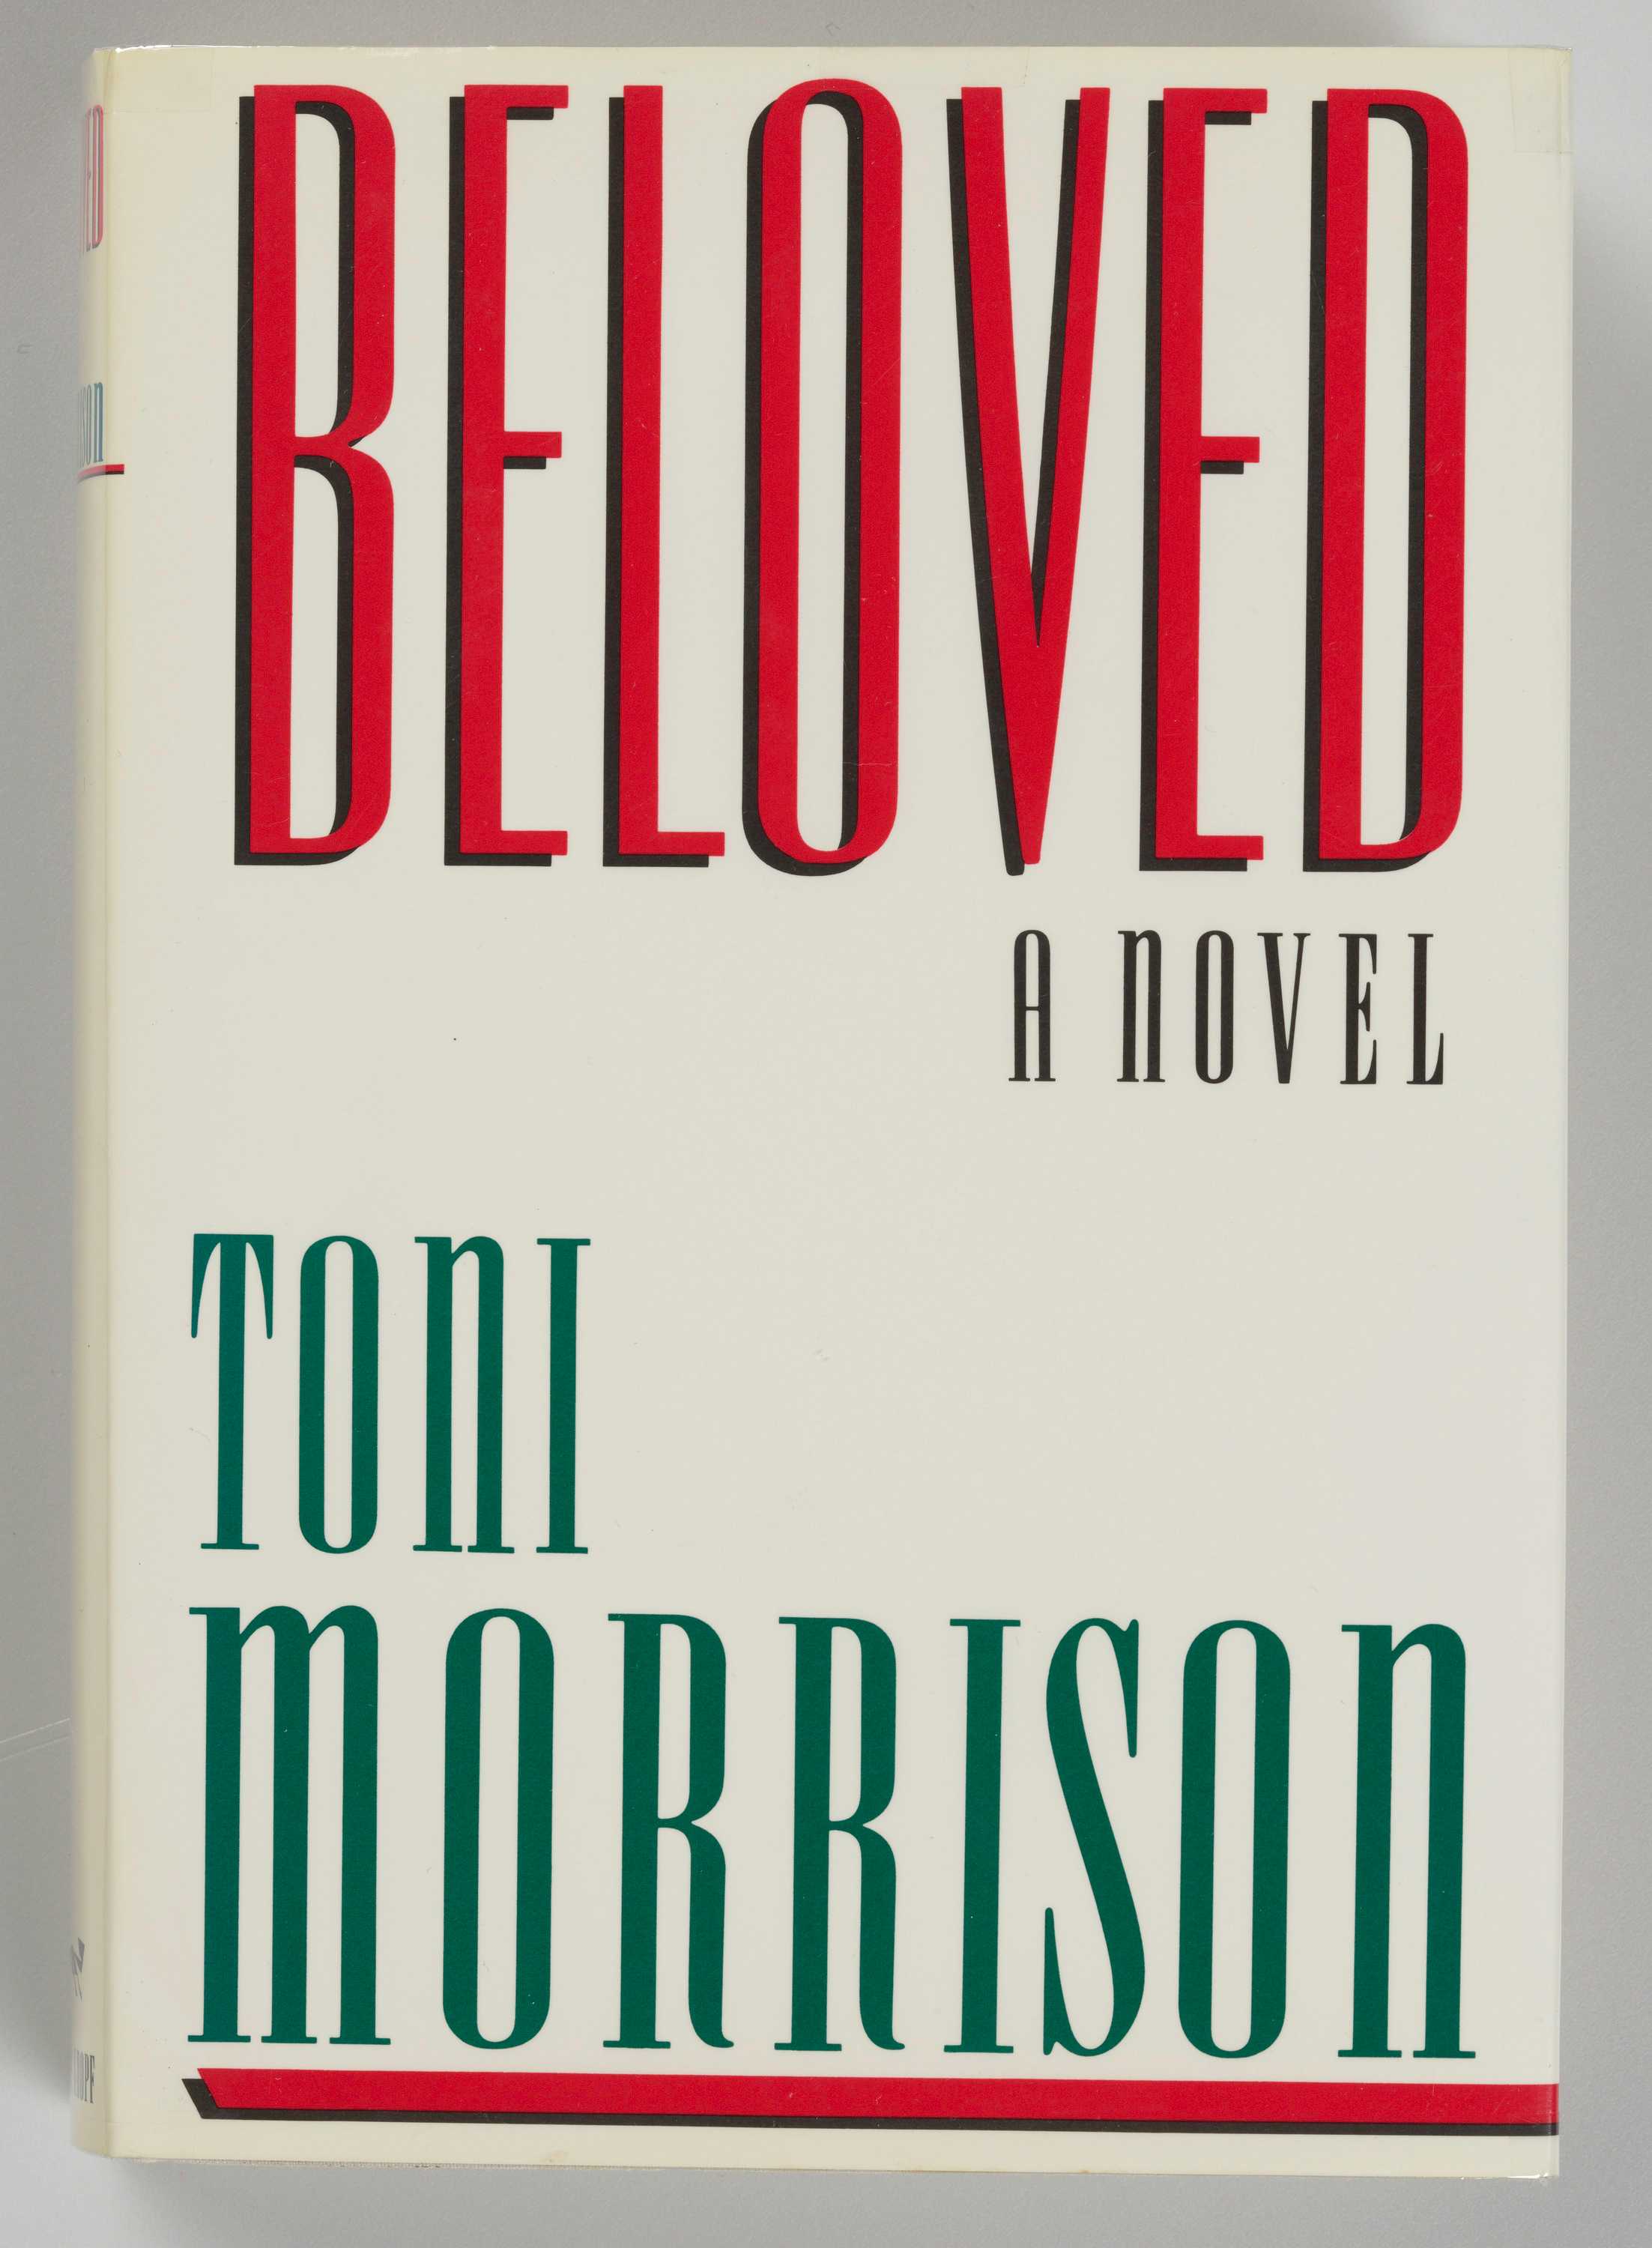 Image of the book cover of Beloved: A Novel by Toni Morrison. The text on the book has the title and author's name in red and green text on a white background.